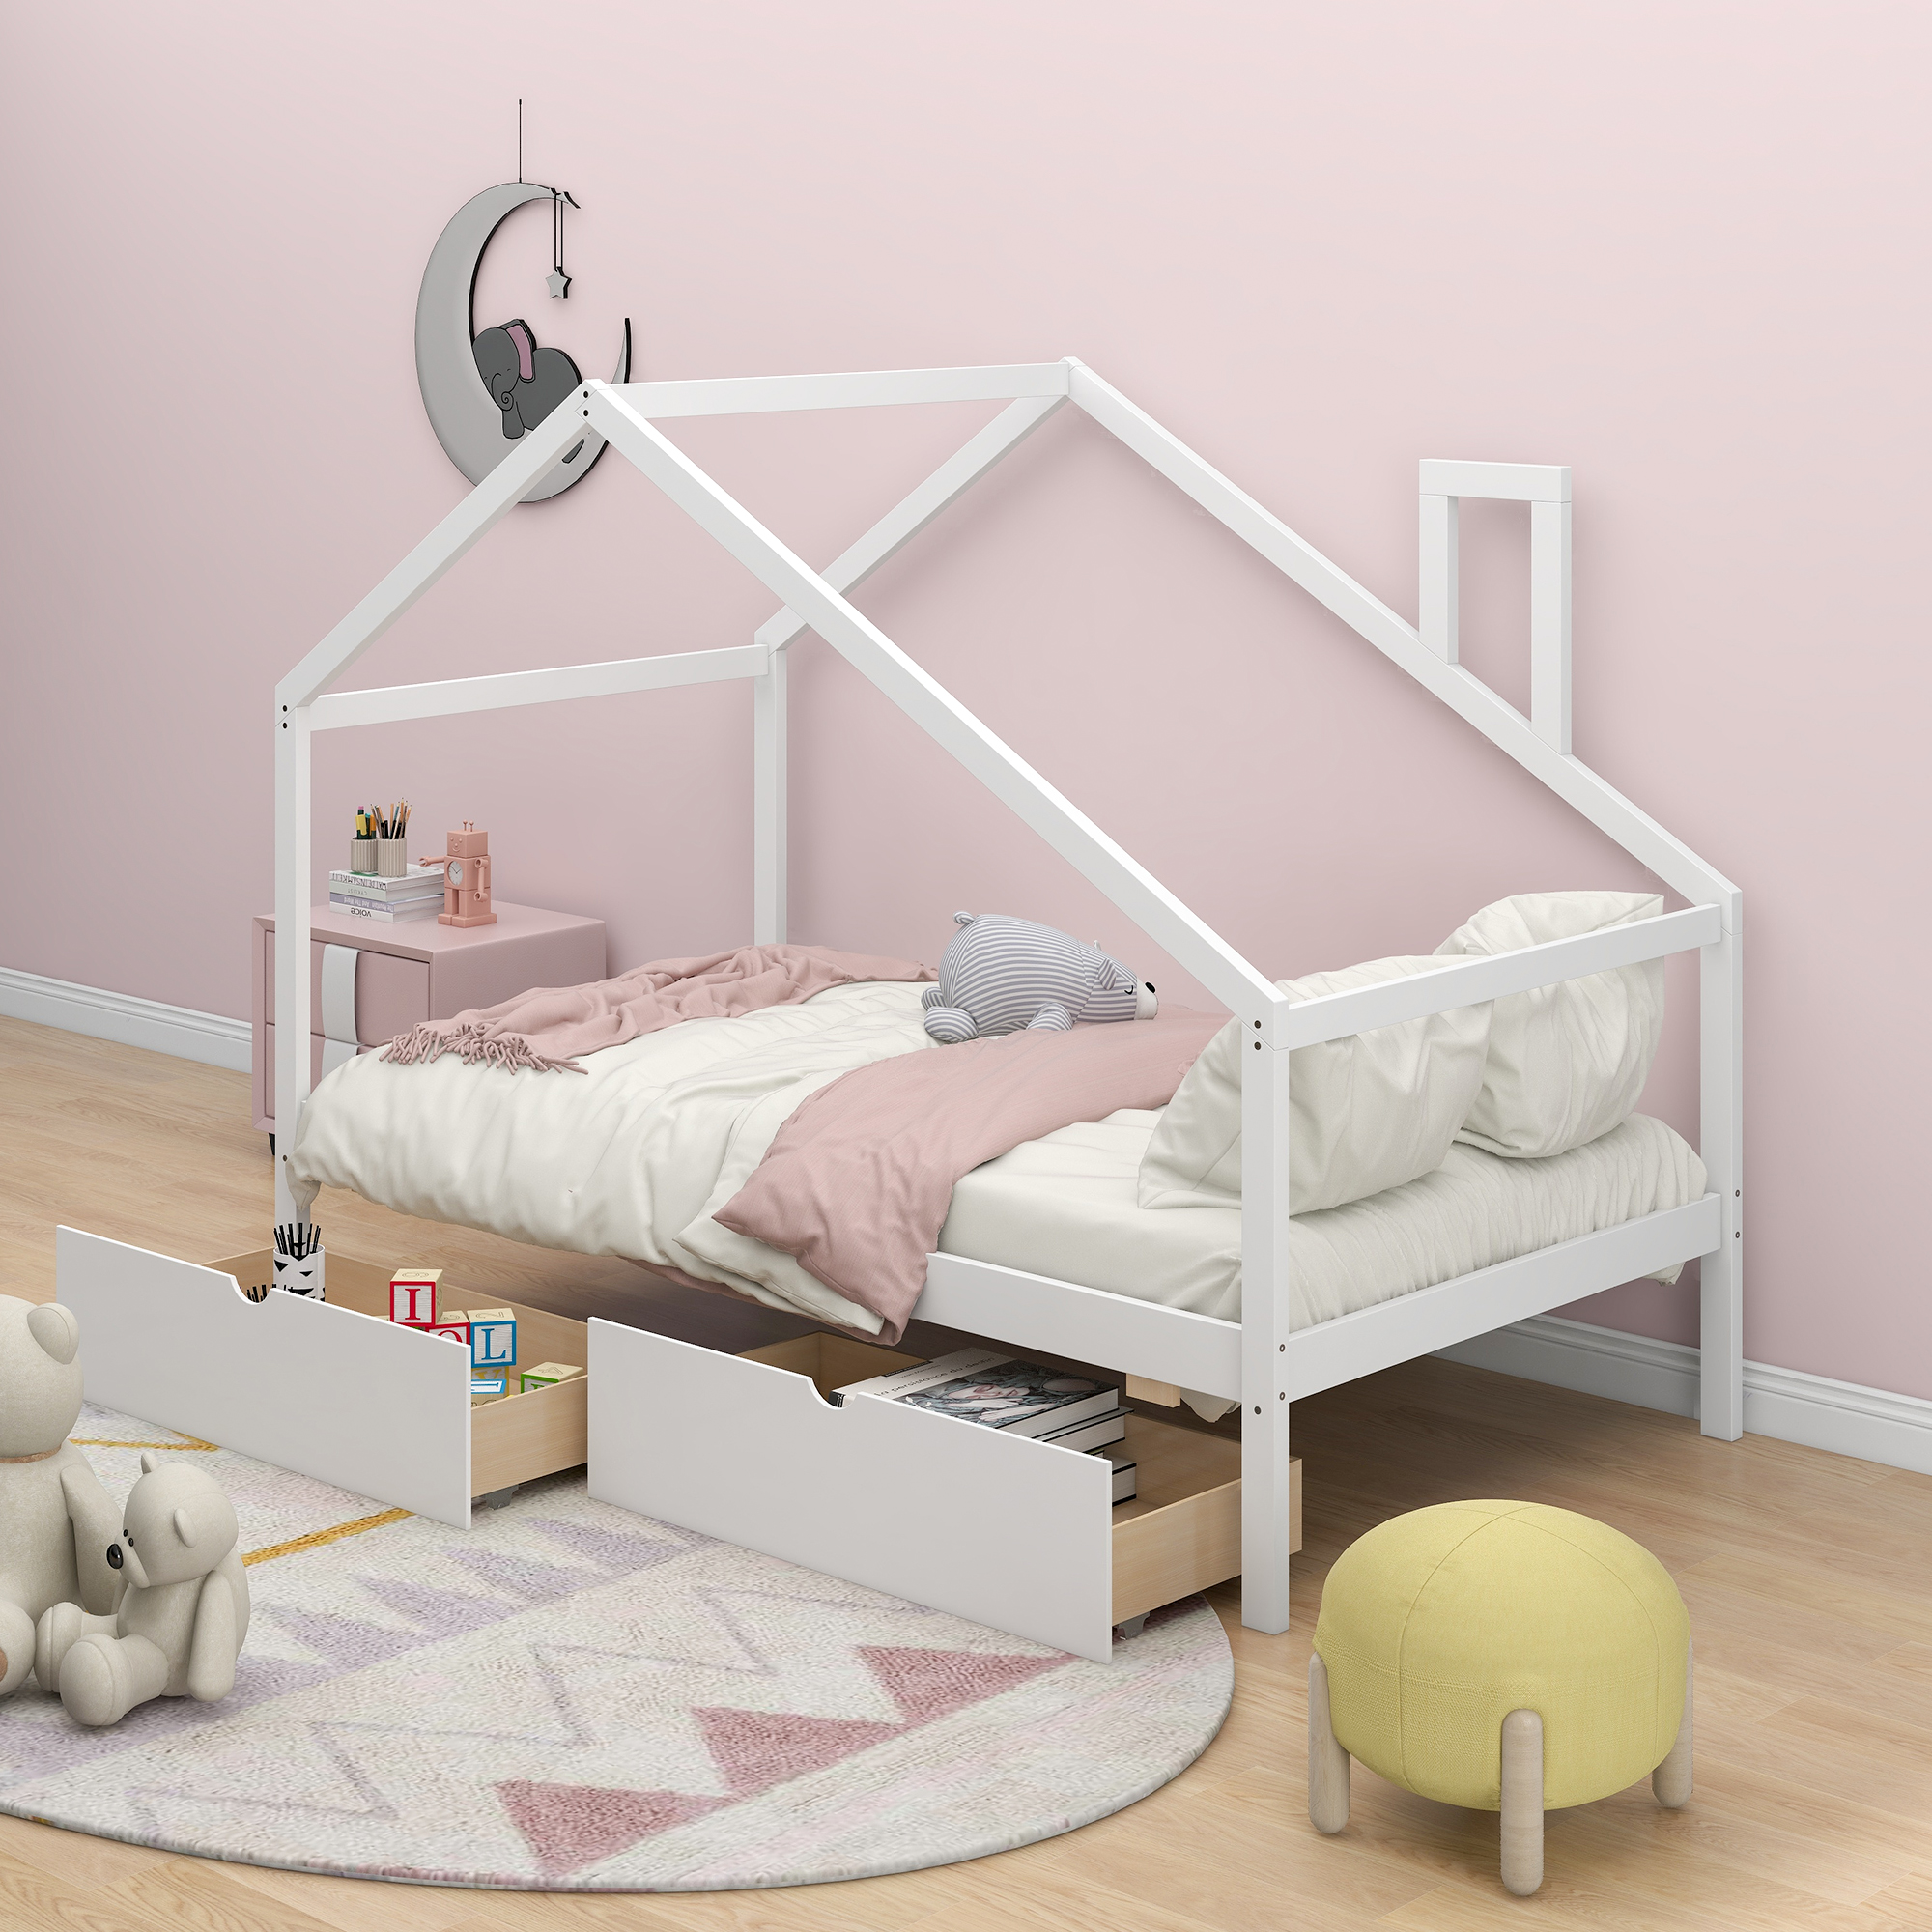 Daybed with Two Pull-out Drawers and Roof, House Bed Frame for Kids, Twin Size, White-Boyel Living